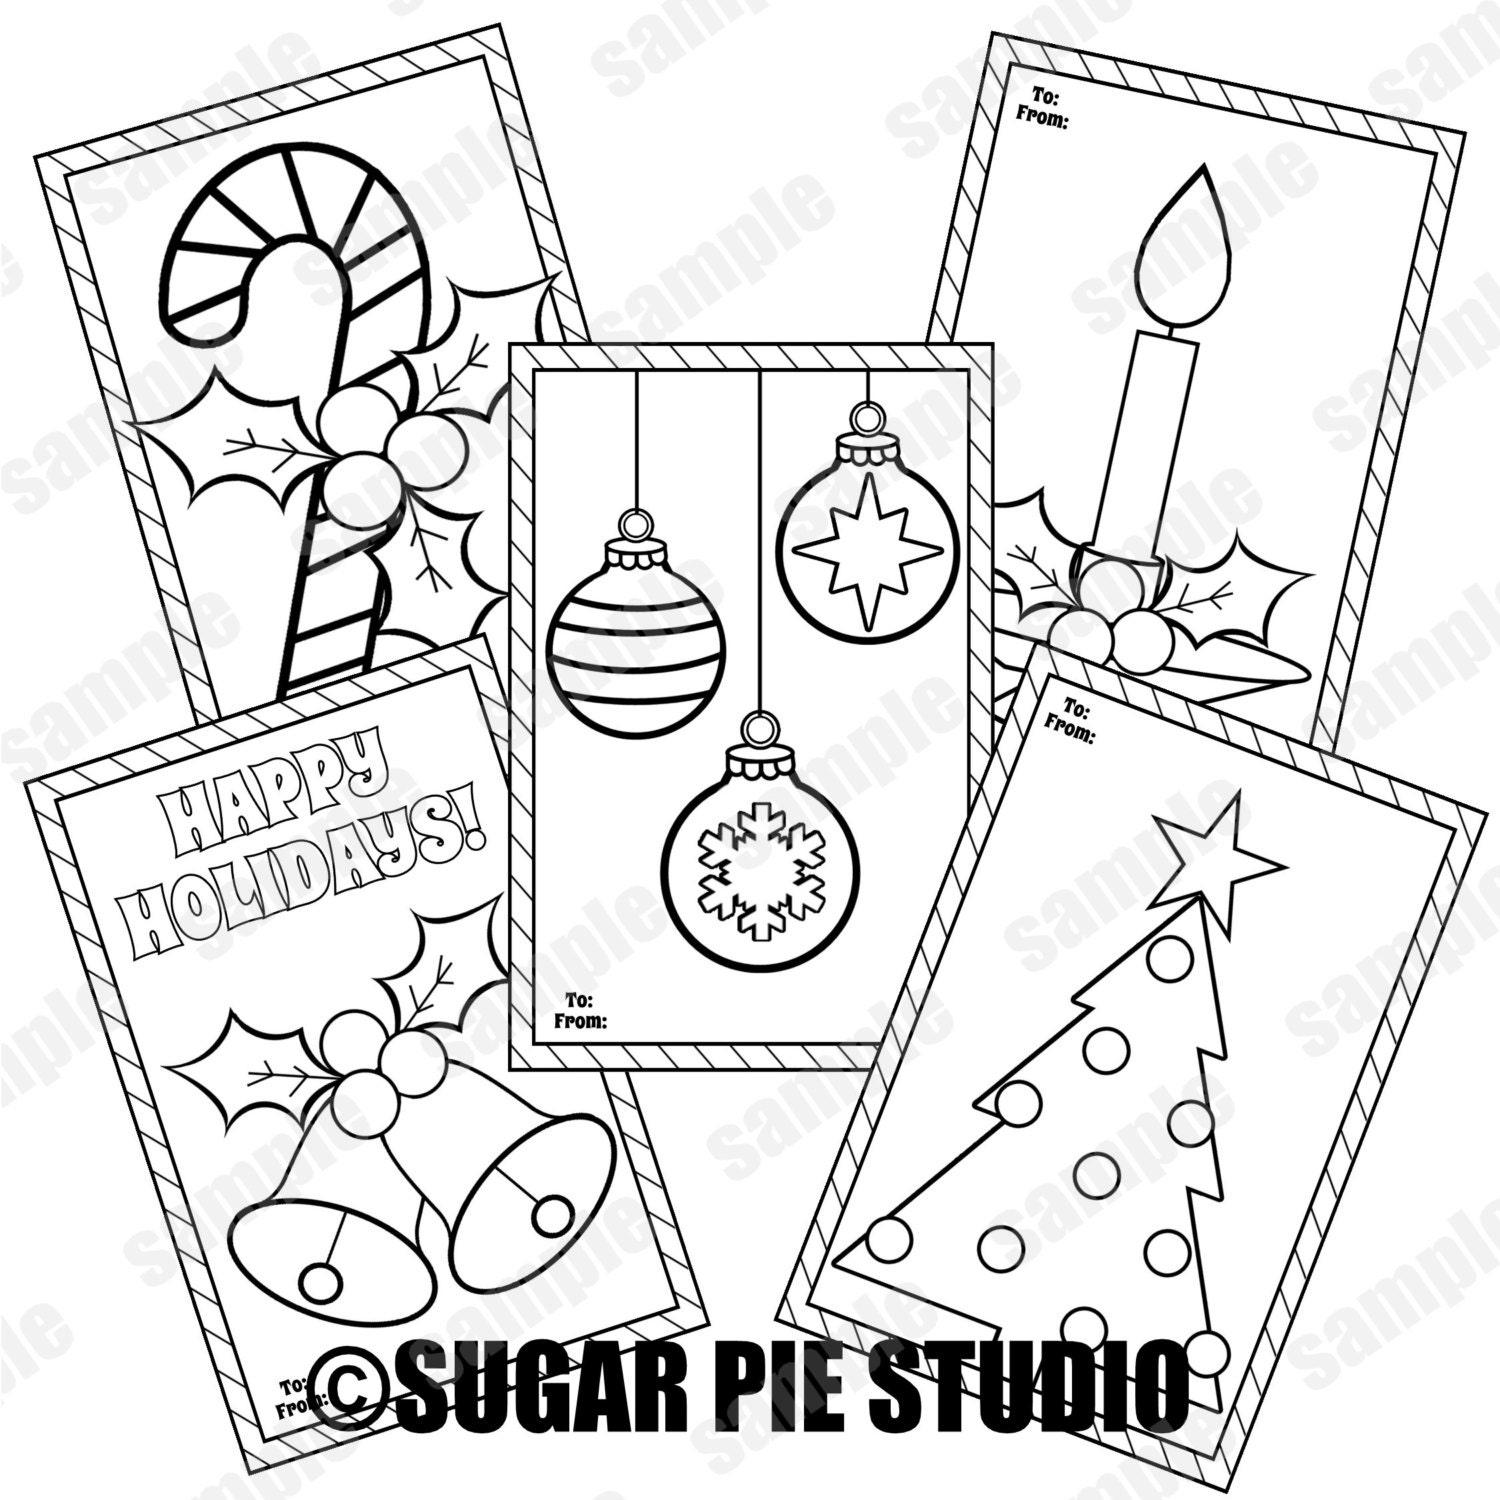 Download Christmas coloring cards Assorted 10 pack coloring pages 4x6 Instand download Pdf and Jpeg included